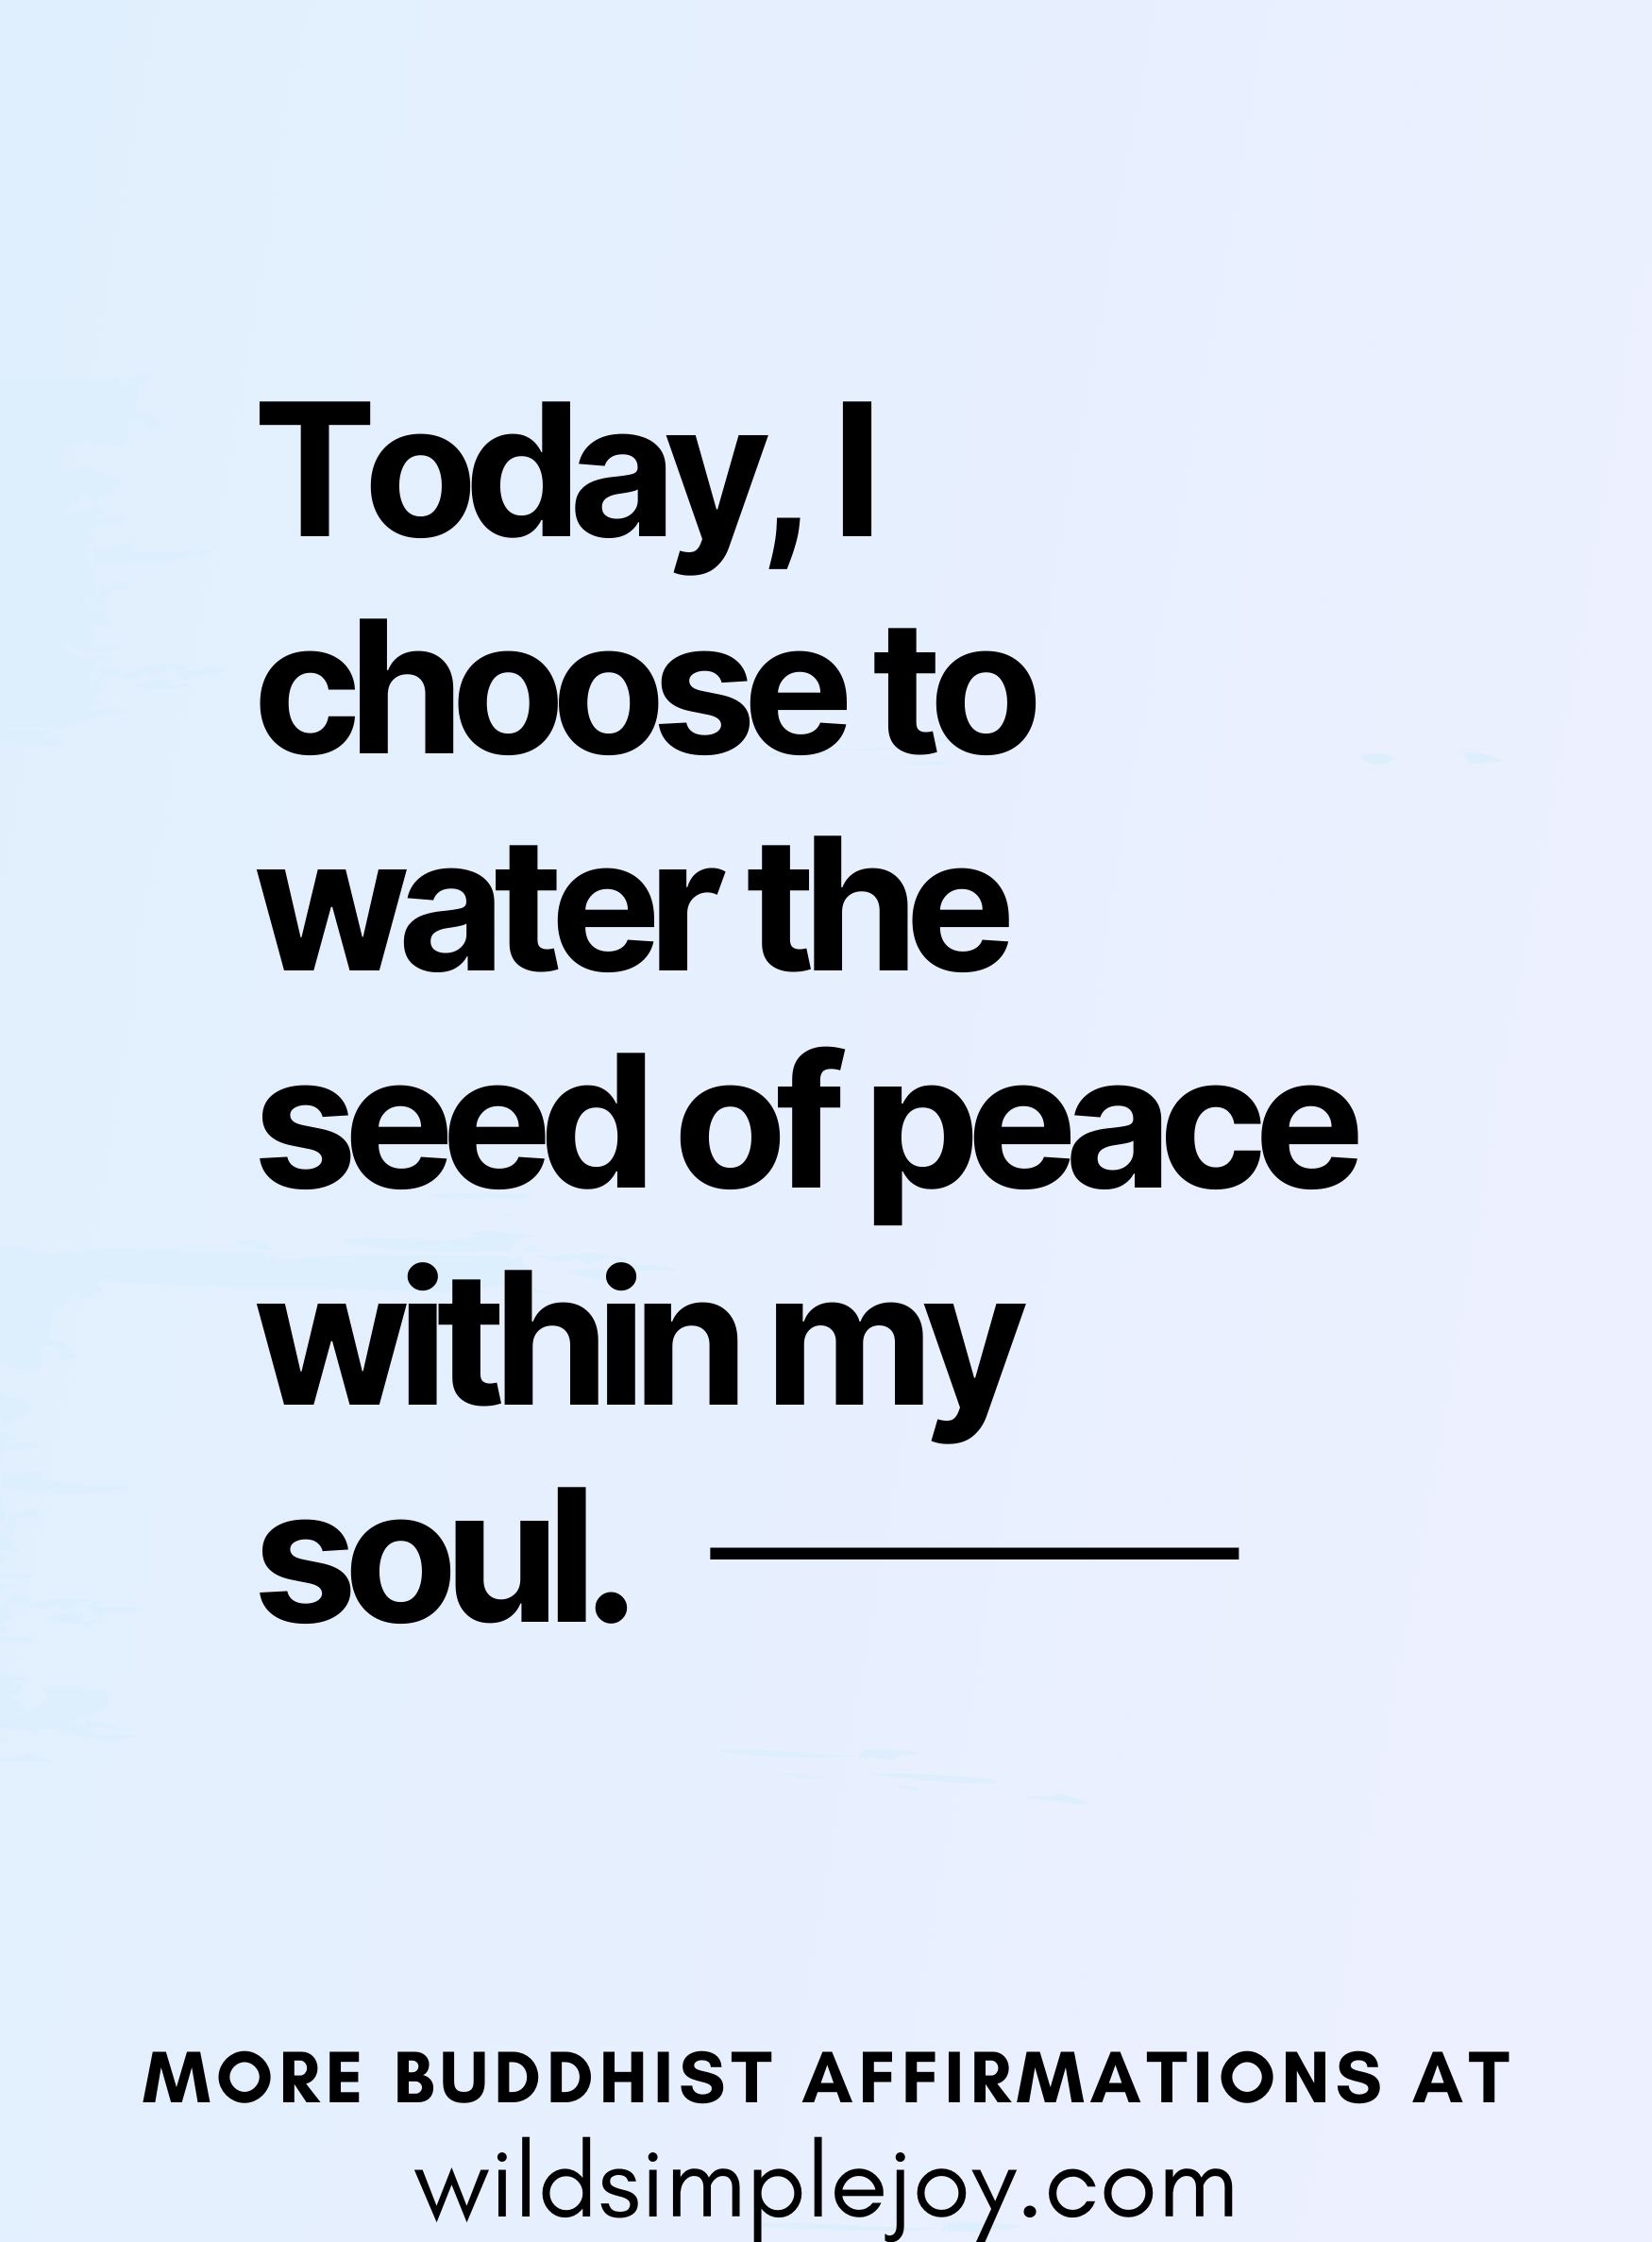 Today, I choose to water the seed of peace within my soul. (on a blue and purple background)